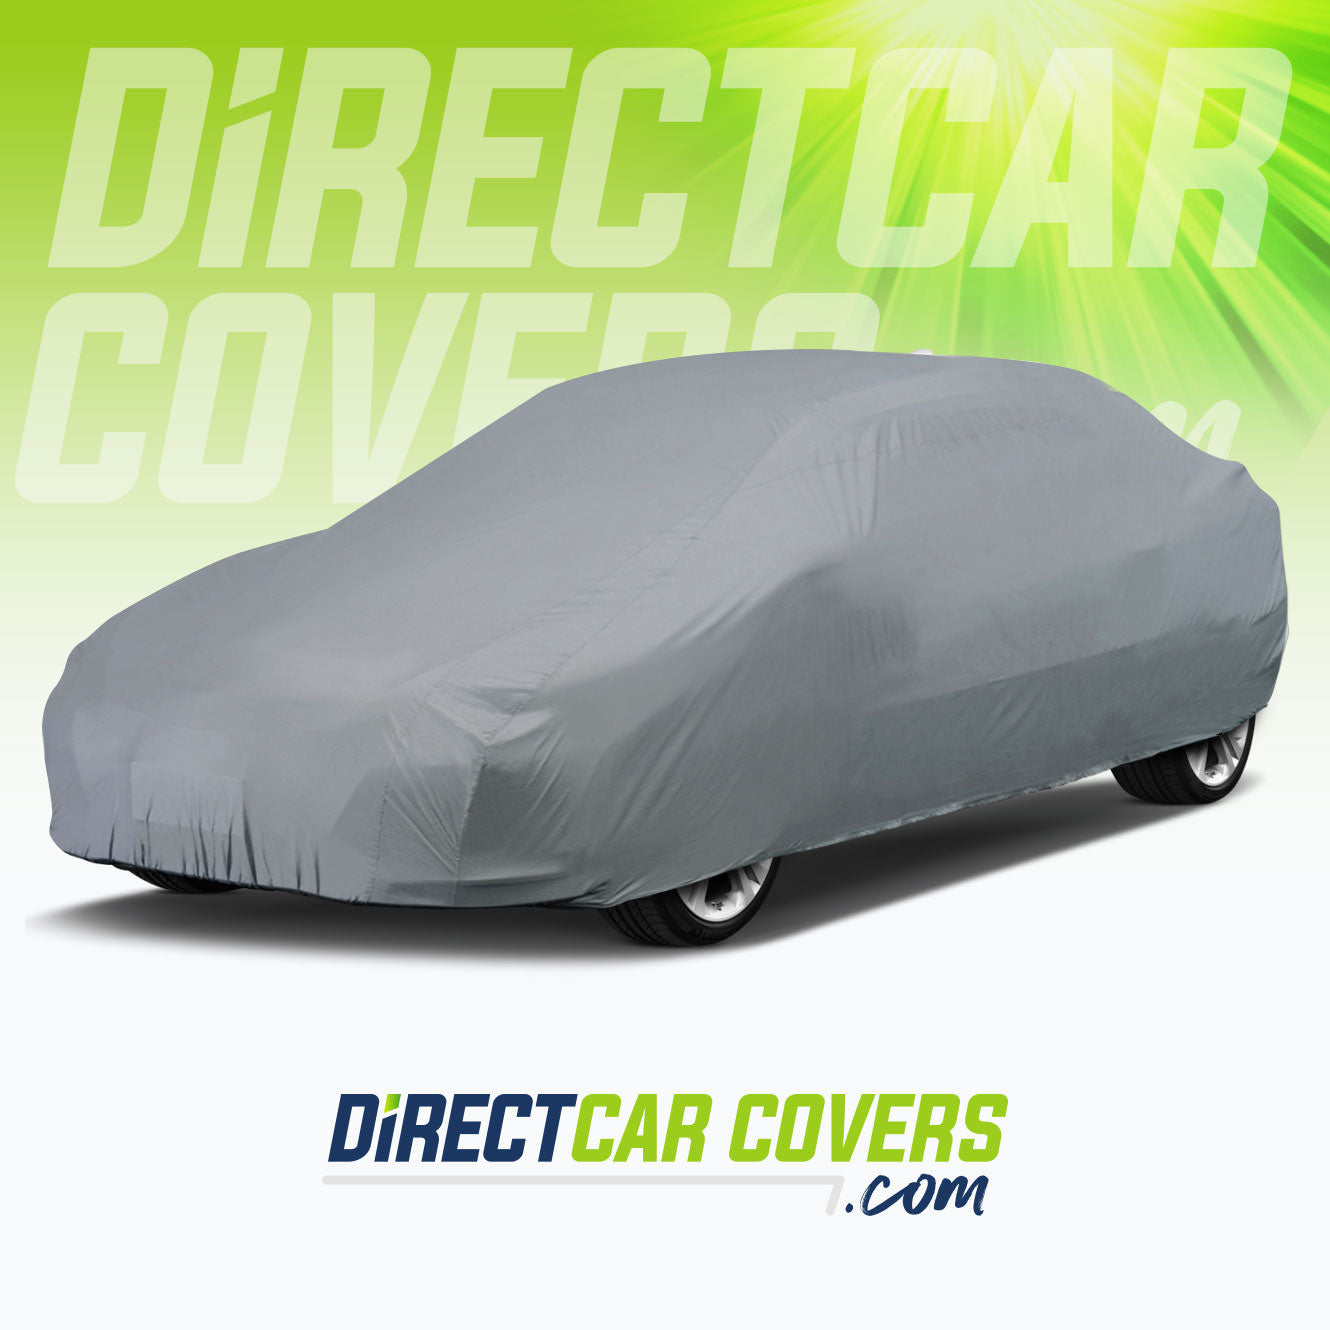 Toyota GT86 Cover - Premium Style –